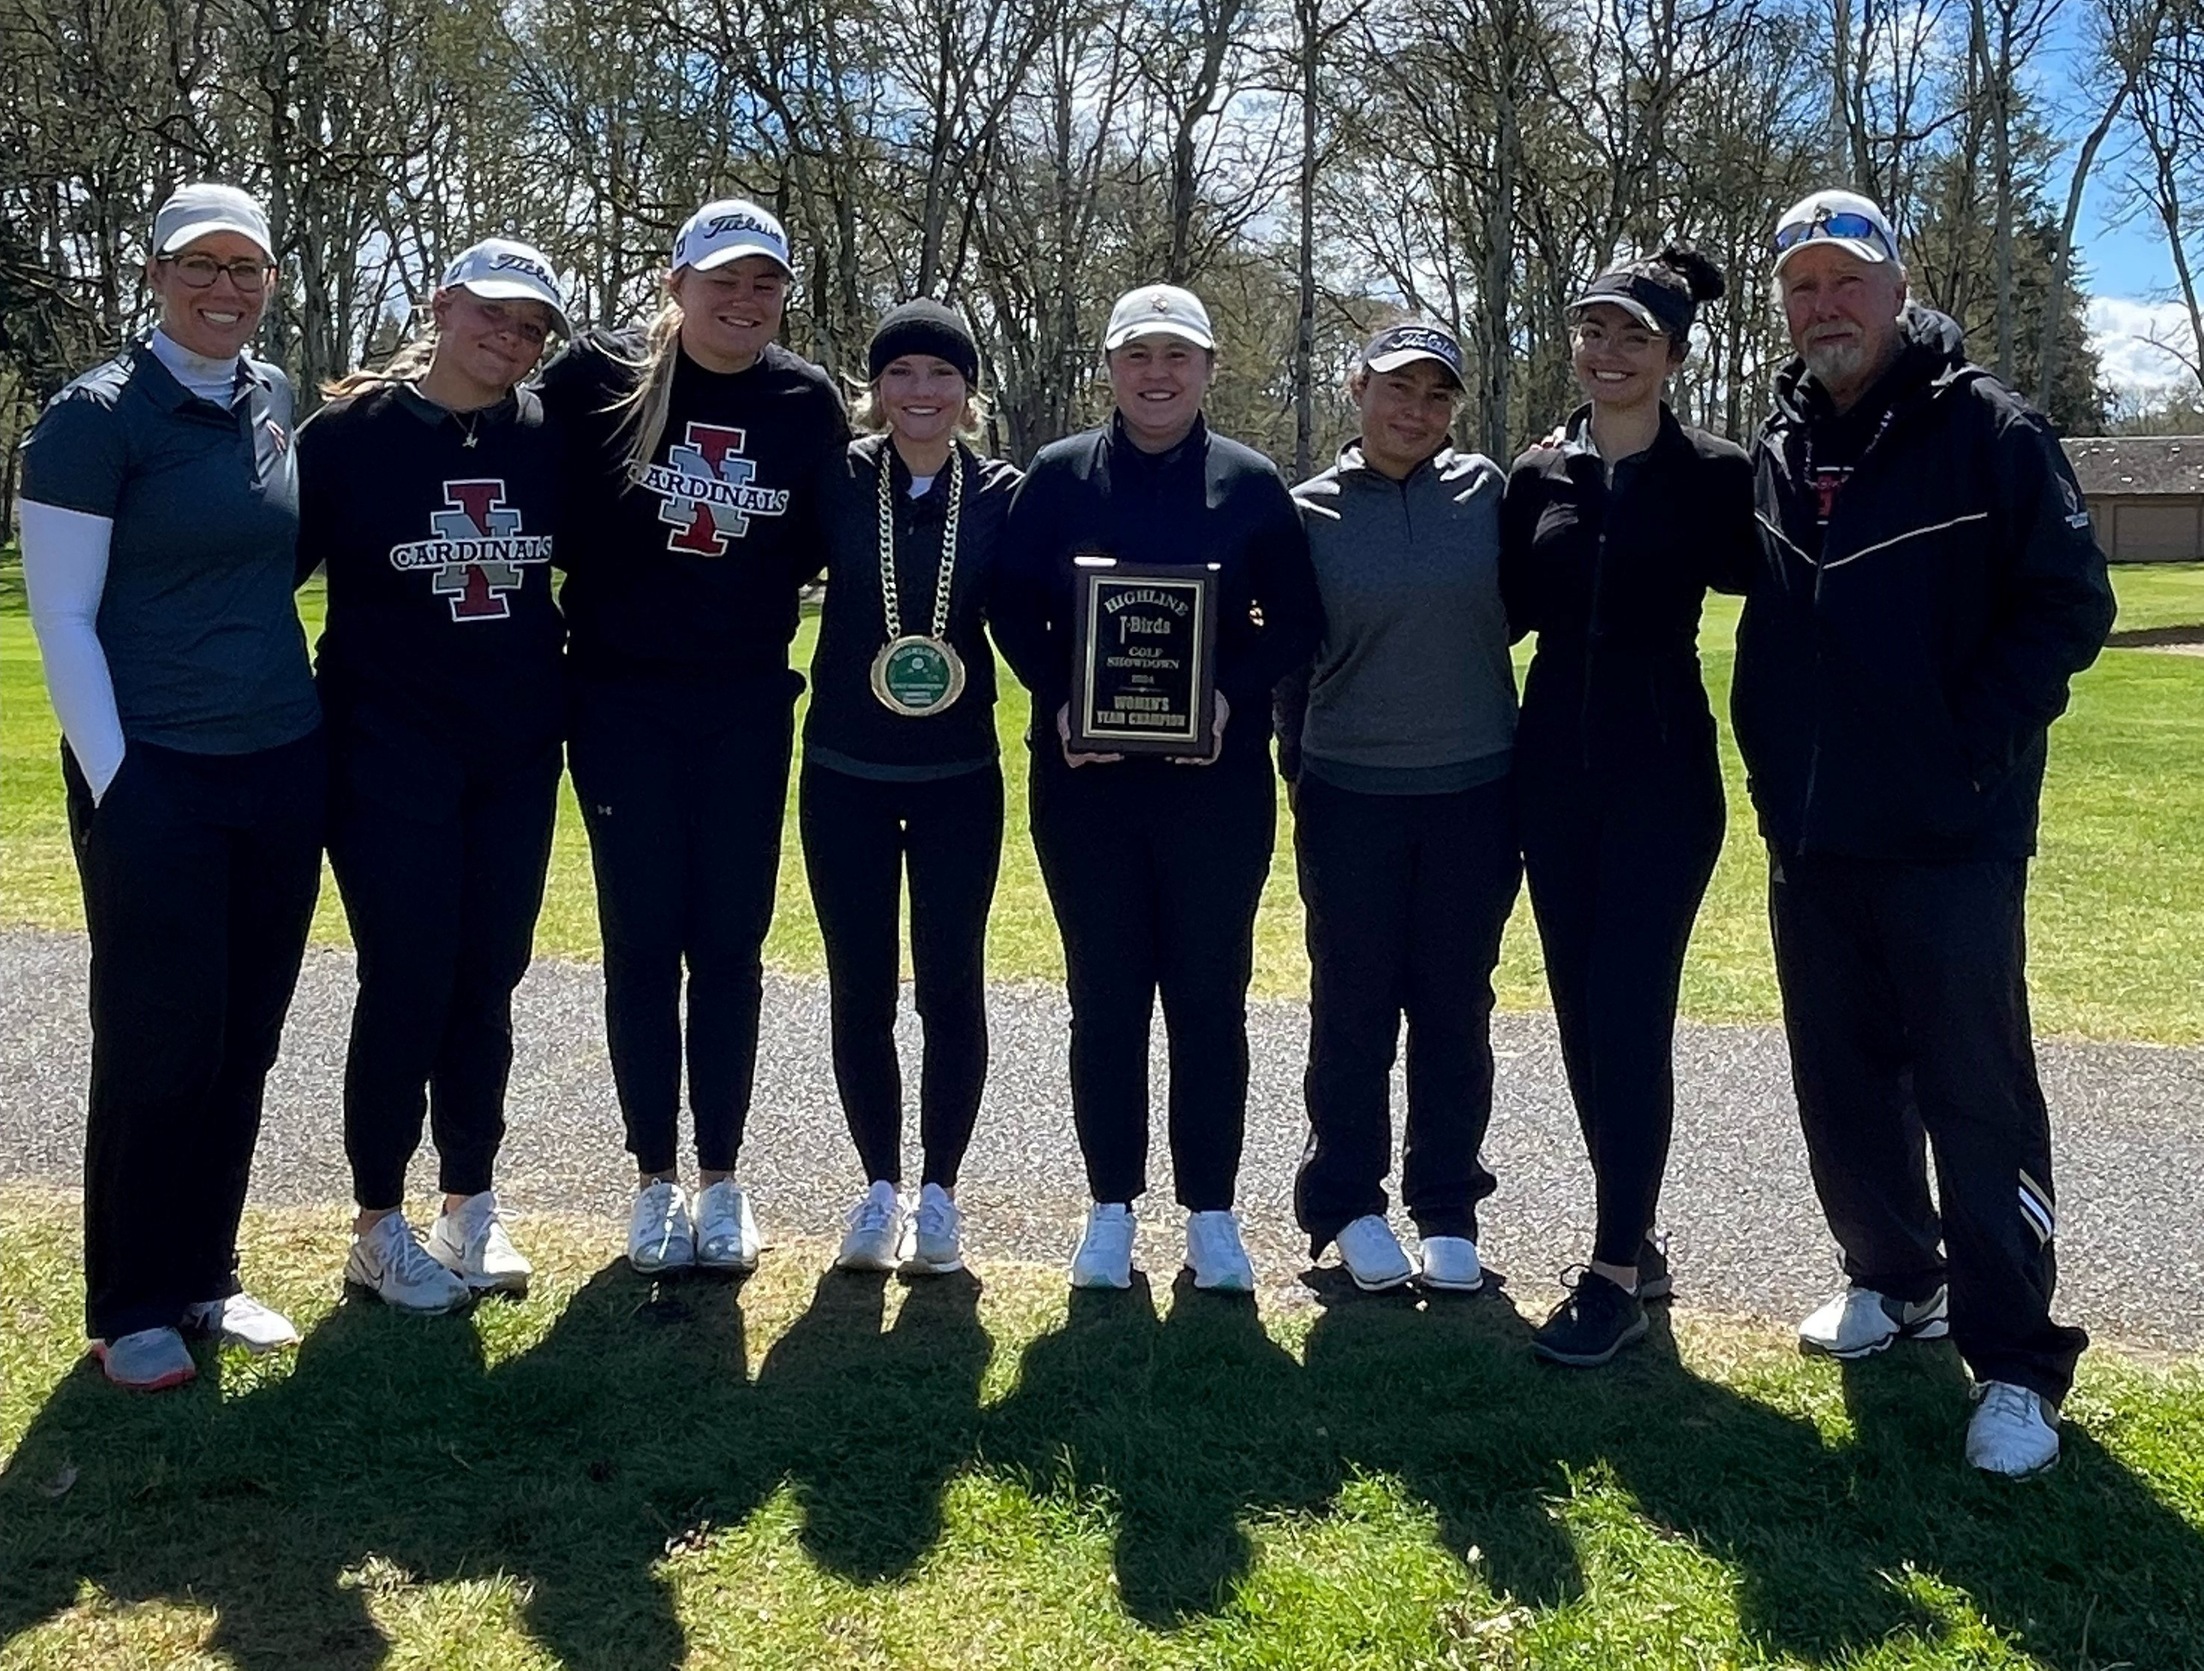 The North Idaho College women's golf team won a Northwest Athletic Conference tournament hosted by Highline Community College at Oakbrook Golf Course in Lakewood, Wash. From left are assistant coach Brittany Pounds, Megan Quinton, Ava Young, Rien Solodan, Sofia Lippiello, Laila Jalil, Lauryn Bulger and assistant coach Russ Grove.